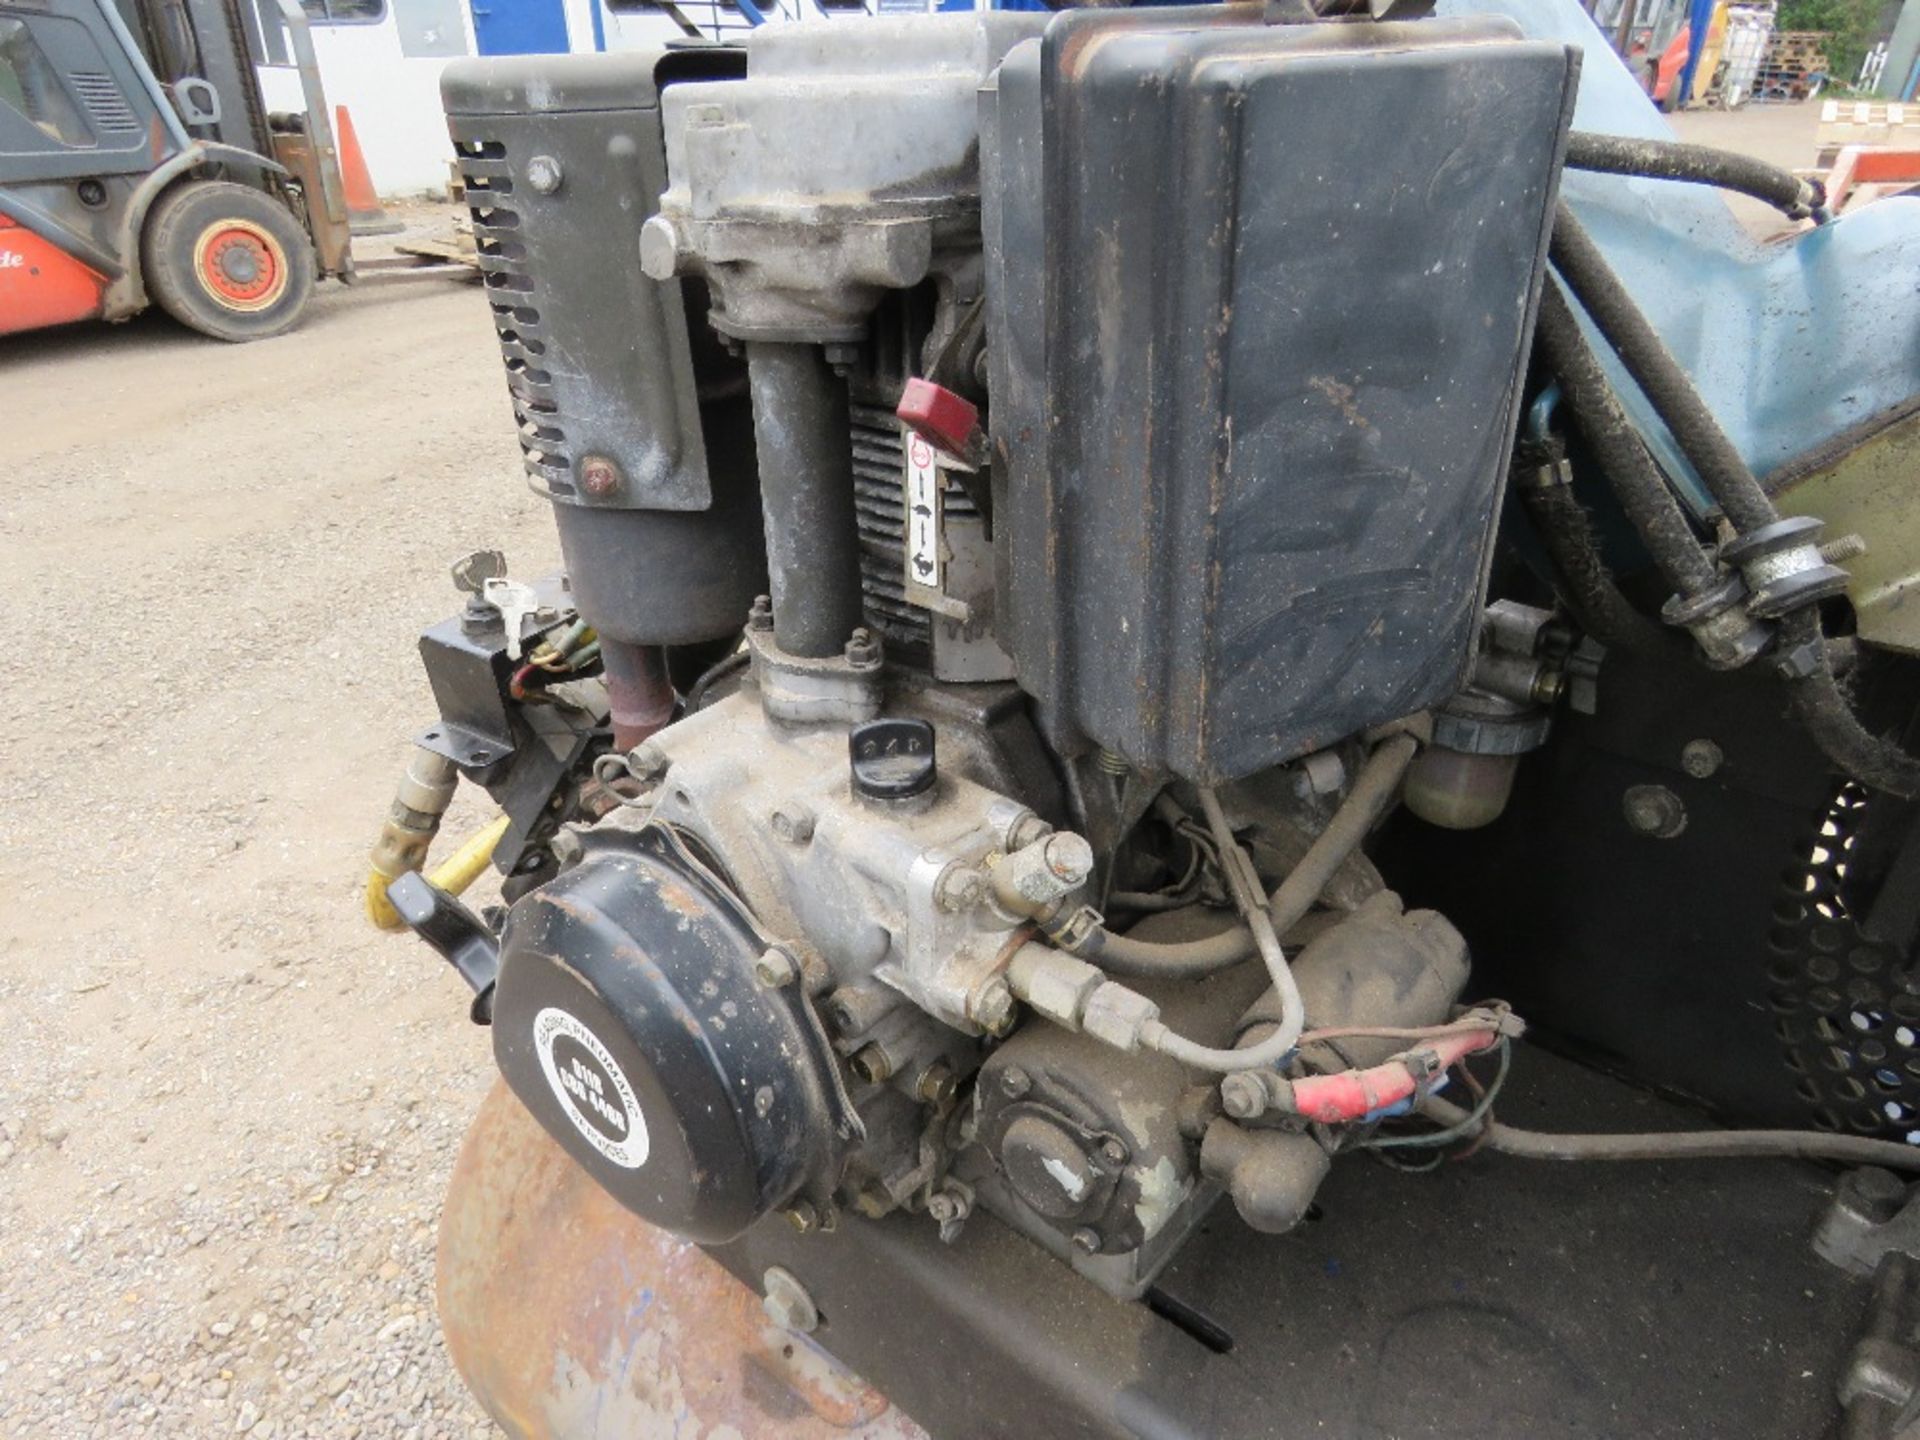 PSIBAR ROBIN ENGINED COMPRESSOR WITH VAN MOUNTING FRAME. SUITABLE FOR TYRE FITTER ETC. SEEN RUNNING - Image 5 of 7